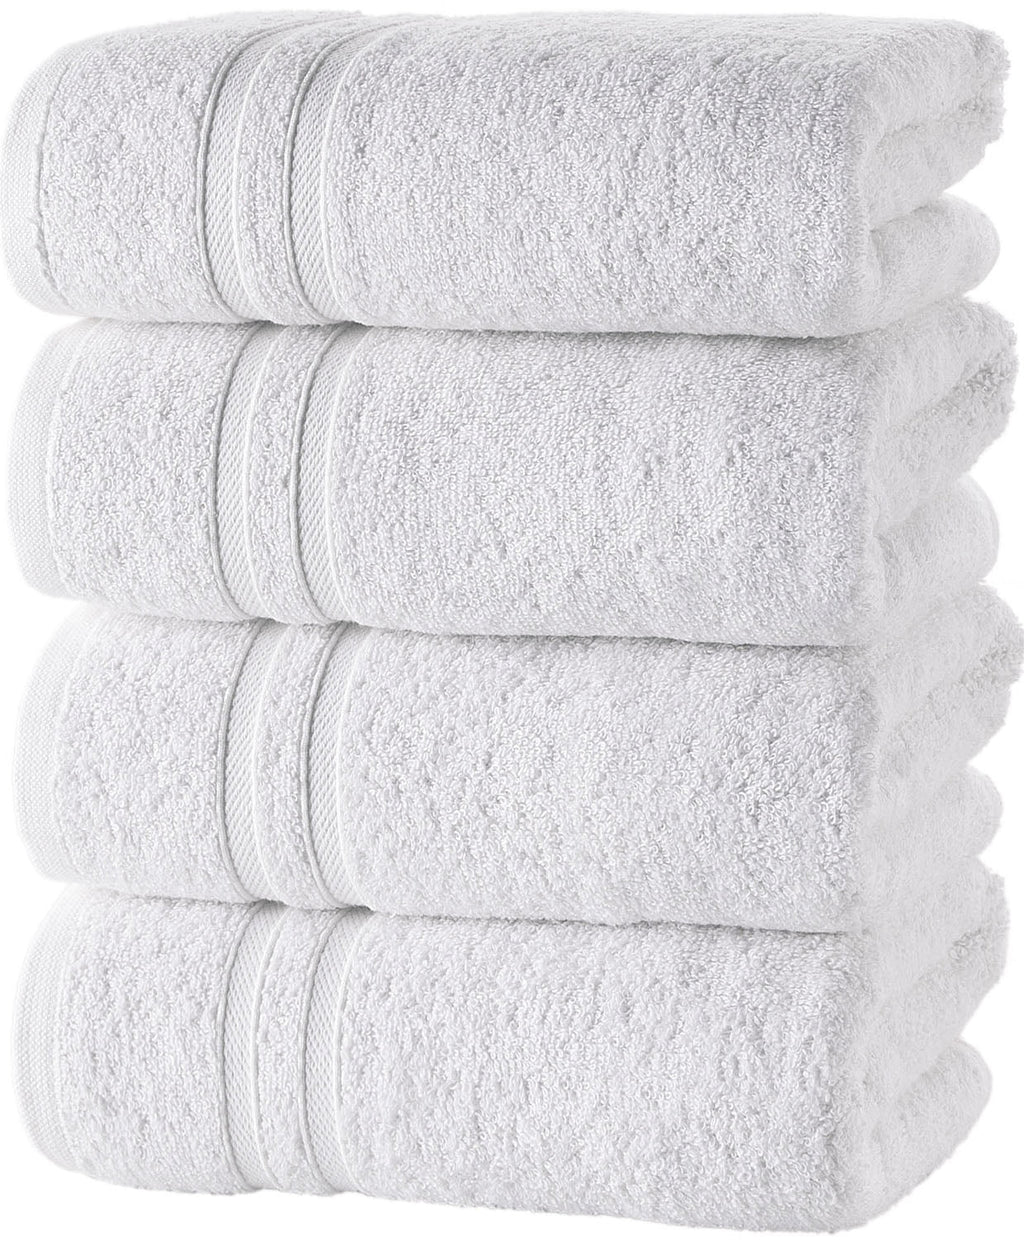 image 0 of Hammam Linen White Hand Towels Set of 4 – Luxury Cotton Hand Towels for Bathroom – Soft Quick Dry Towels